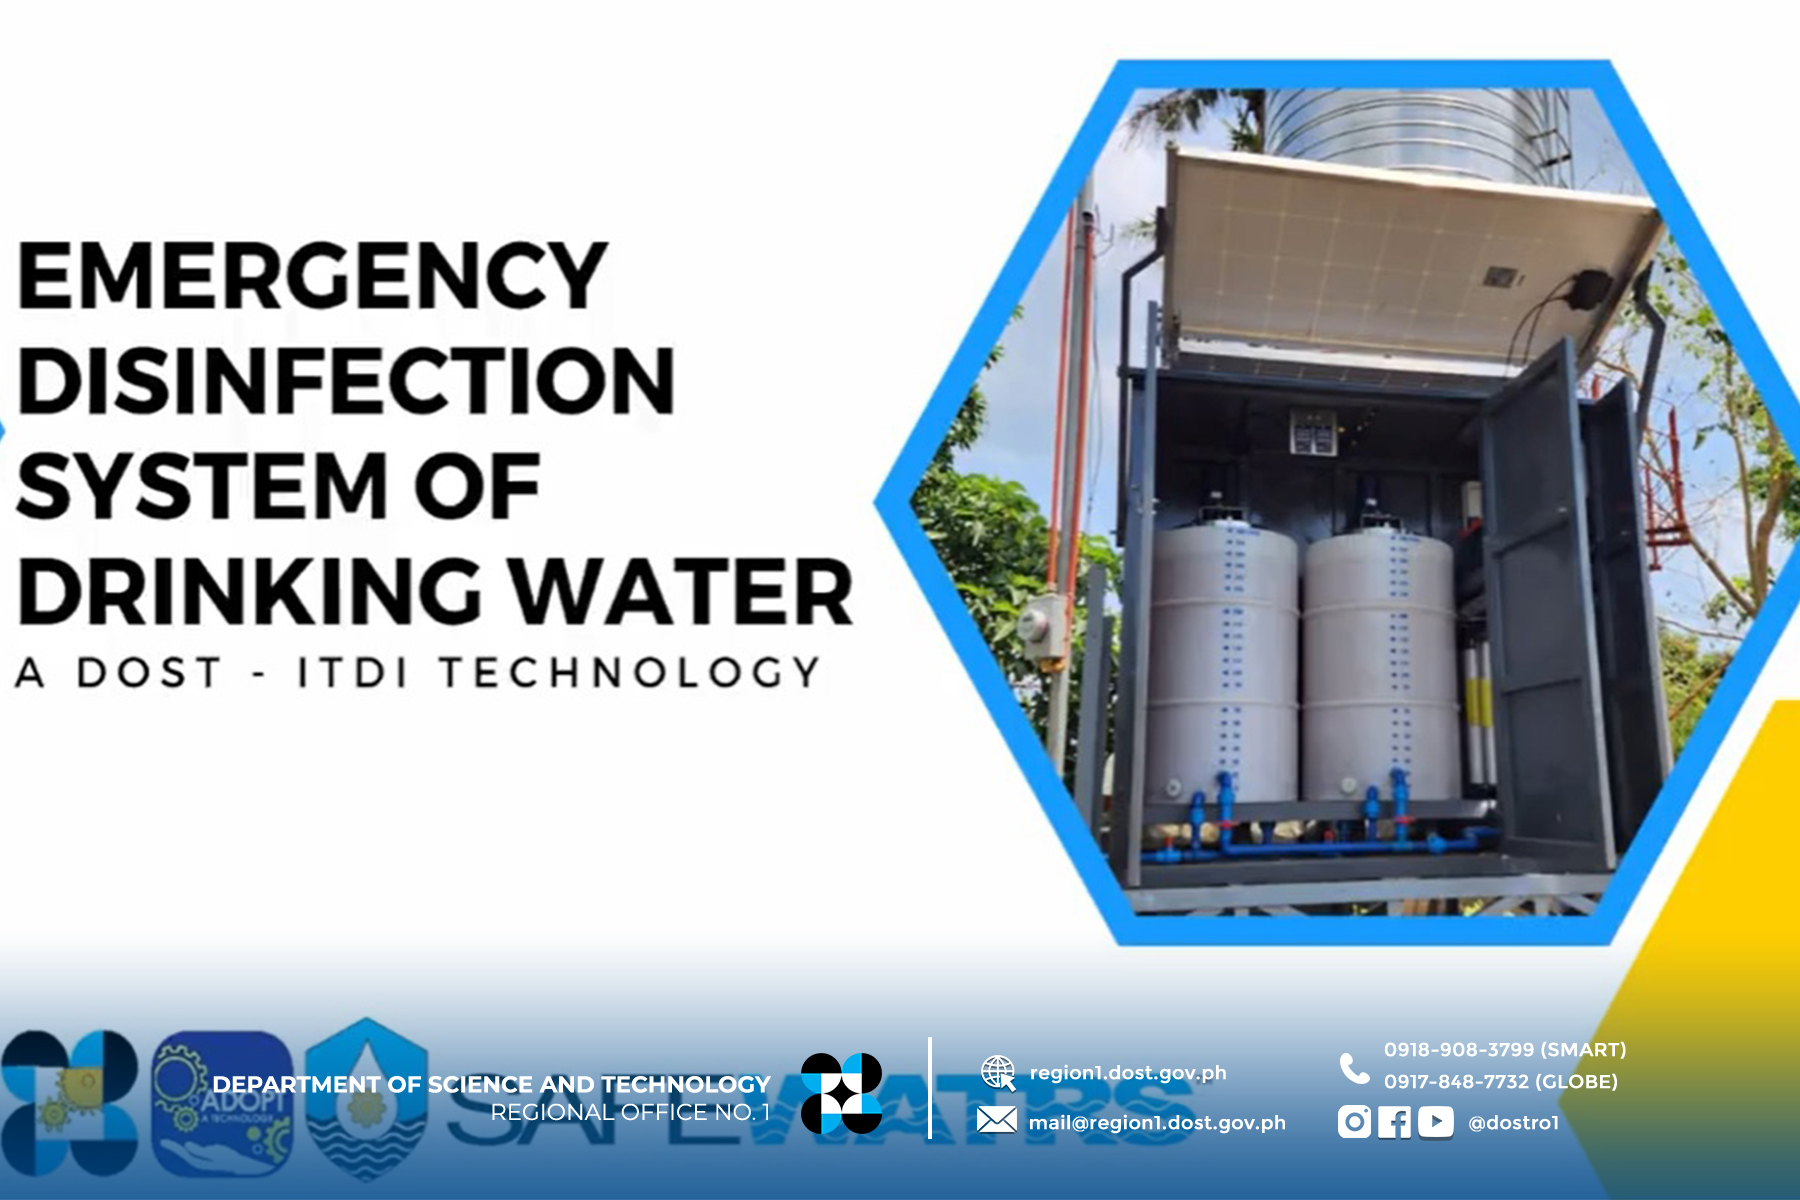 DOST 1 unveils DOST-ITDI’s technology, SAFEWTRS: Emergency Disinfection System of Drinking Water